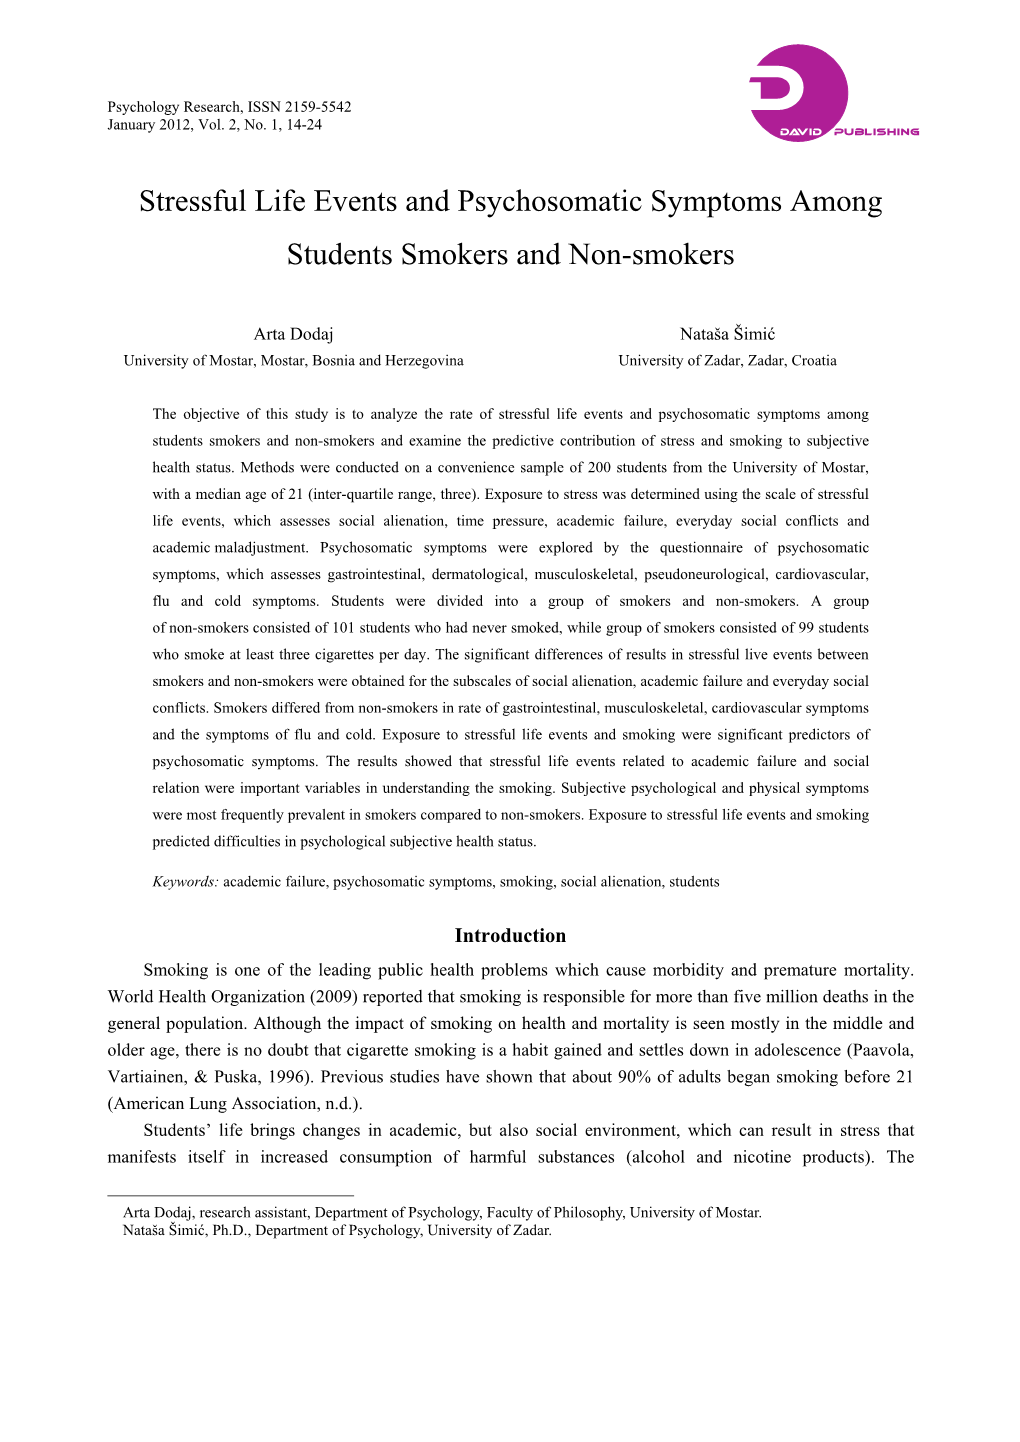 Stressful Life Events and Psychosomatic Symptoms Among Students Smokers and Non-Smokers